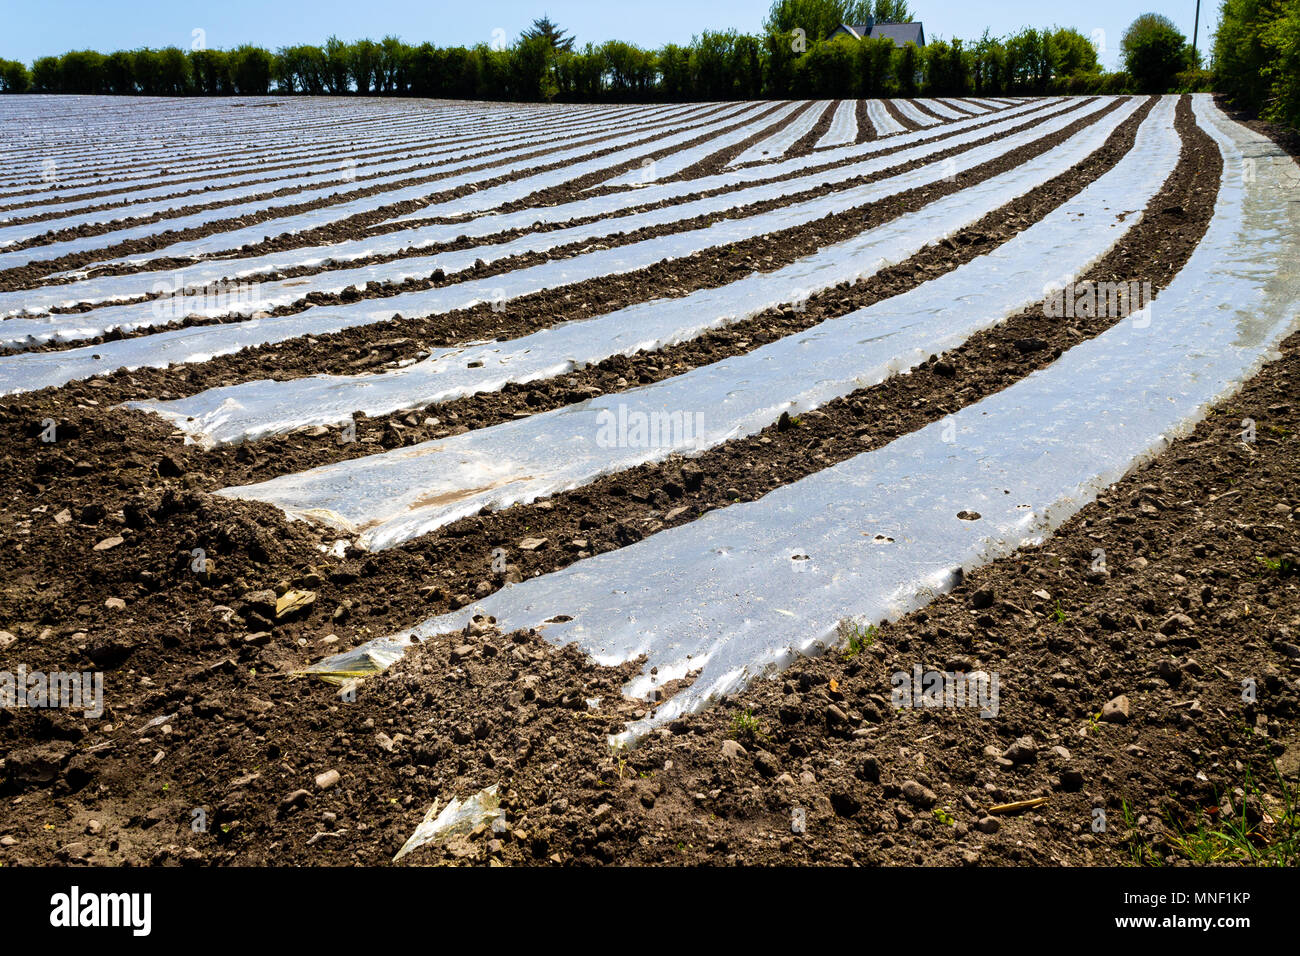 biodegradable plastic sheeting strips covering the ground to warm it and act as frost protection for the maize crop on a farm in ireland Stock Photo